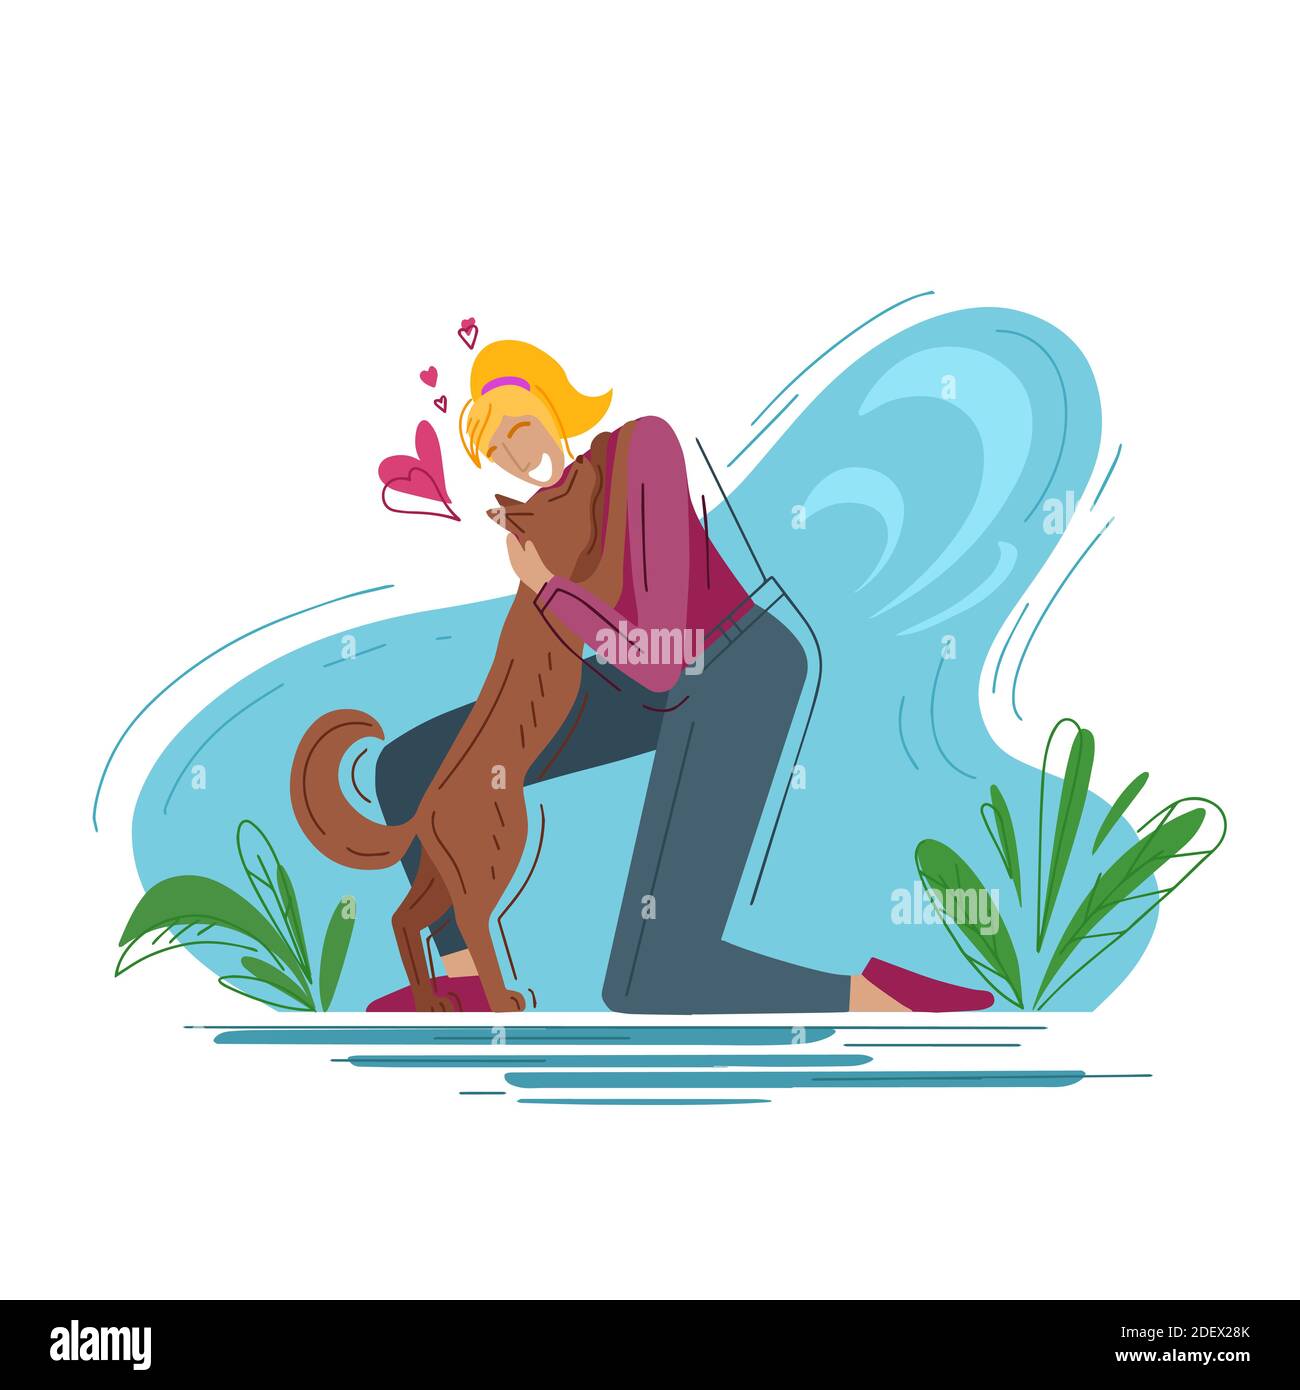 Love for pets. Trendy fashion illustration. Joyful woman hugging a dog on an abstract background. Helping homeless animals. Vector flat illustration f Stock Vector